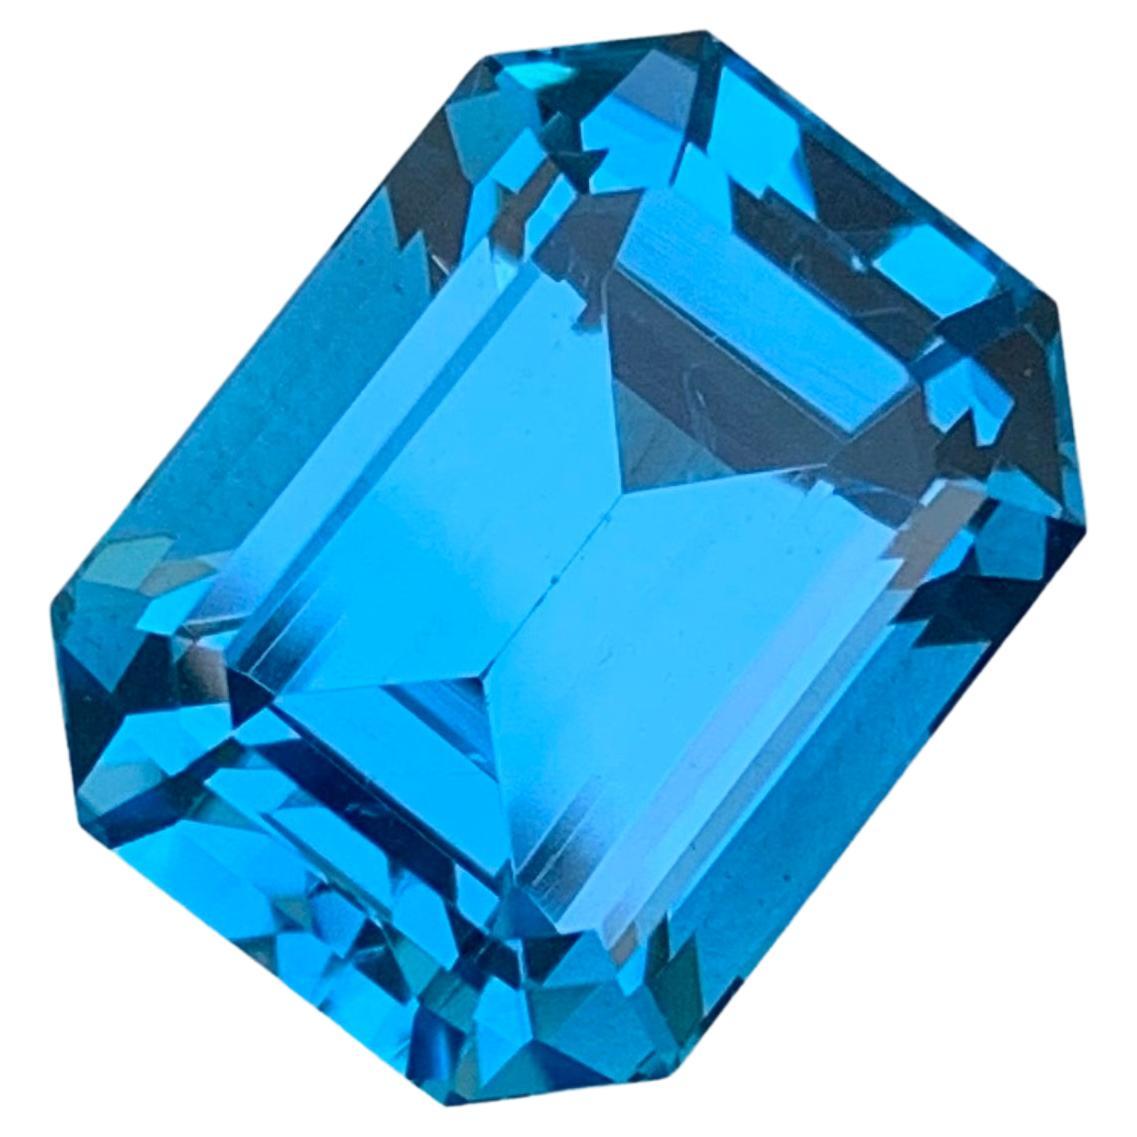 Gorgeous Intense Blue Loose Electric Blue Topaz from Brazil 9.85 Carat Ring Gem For Sale